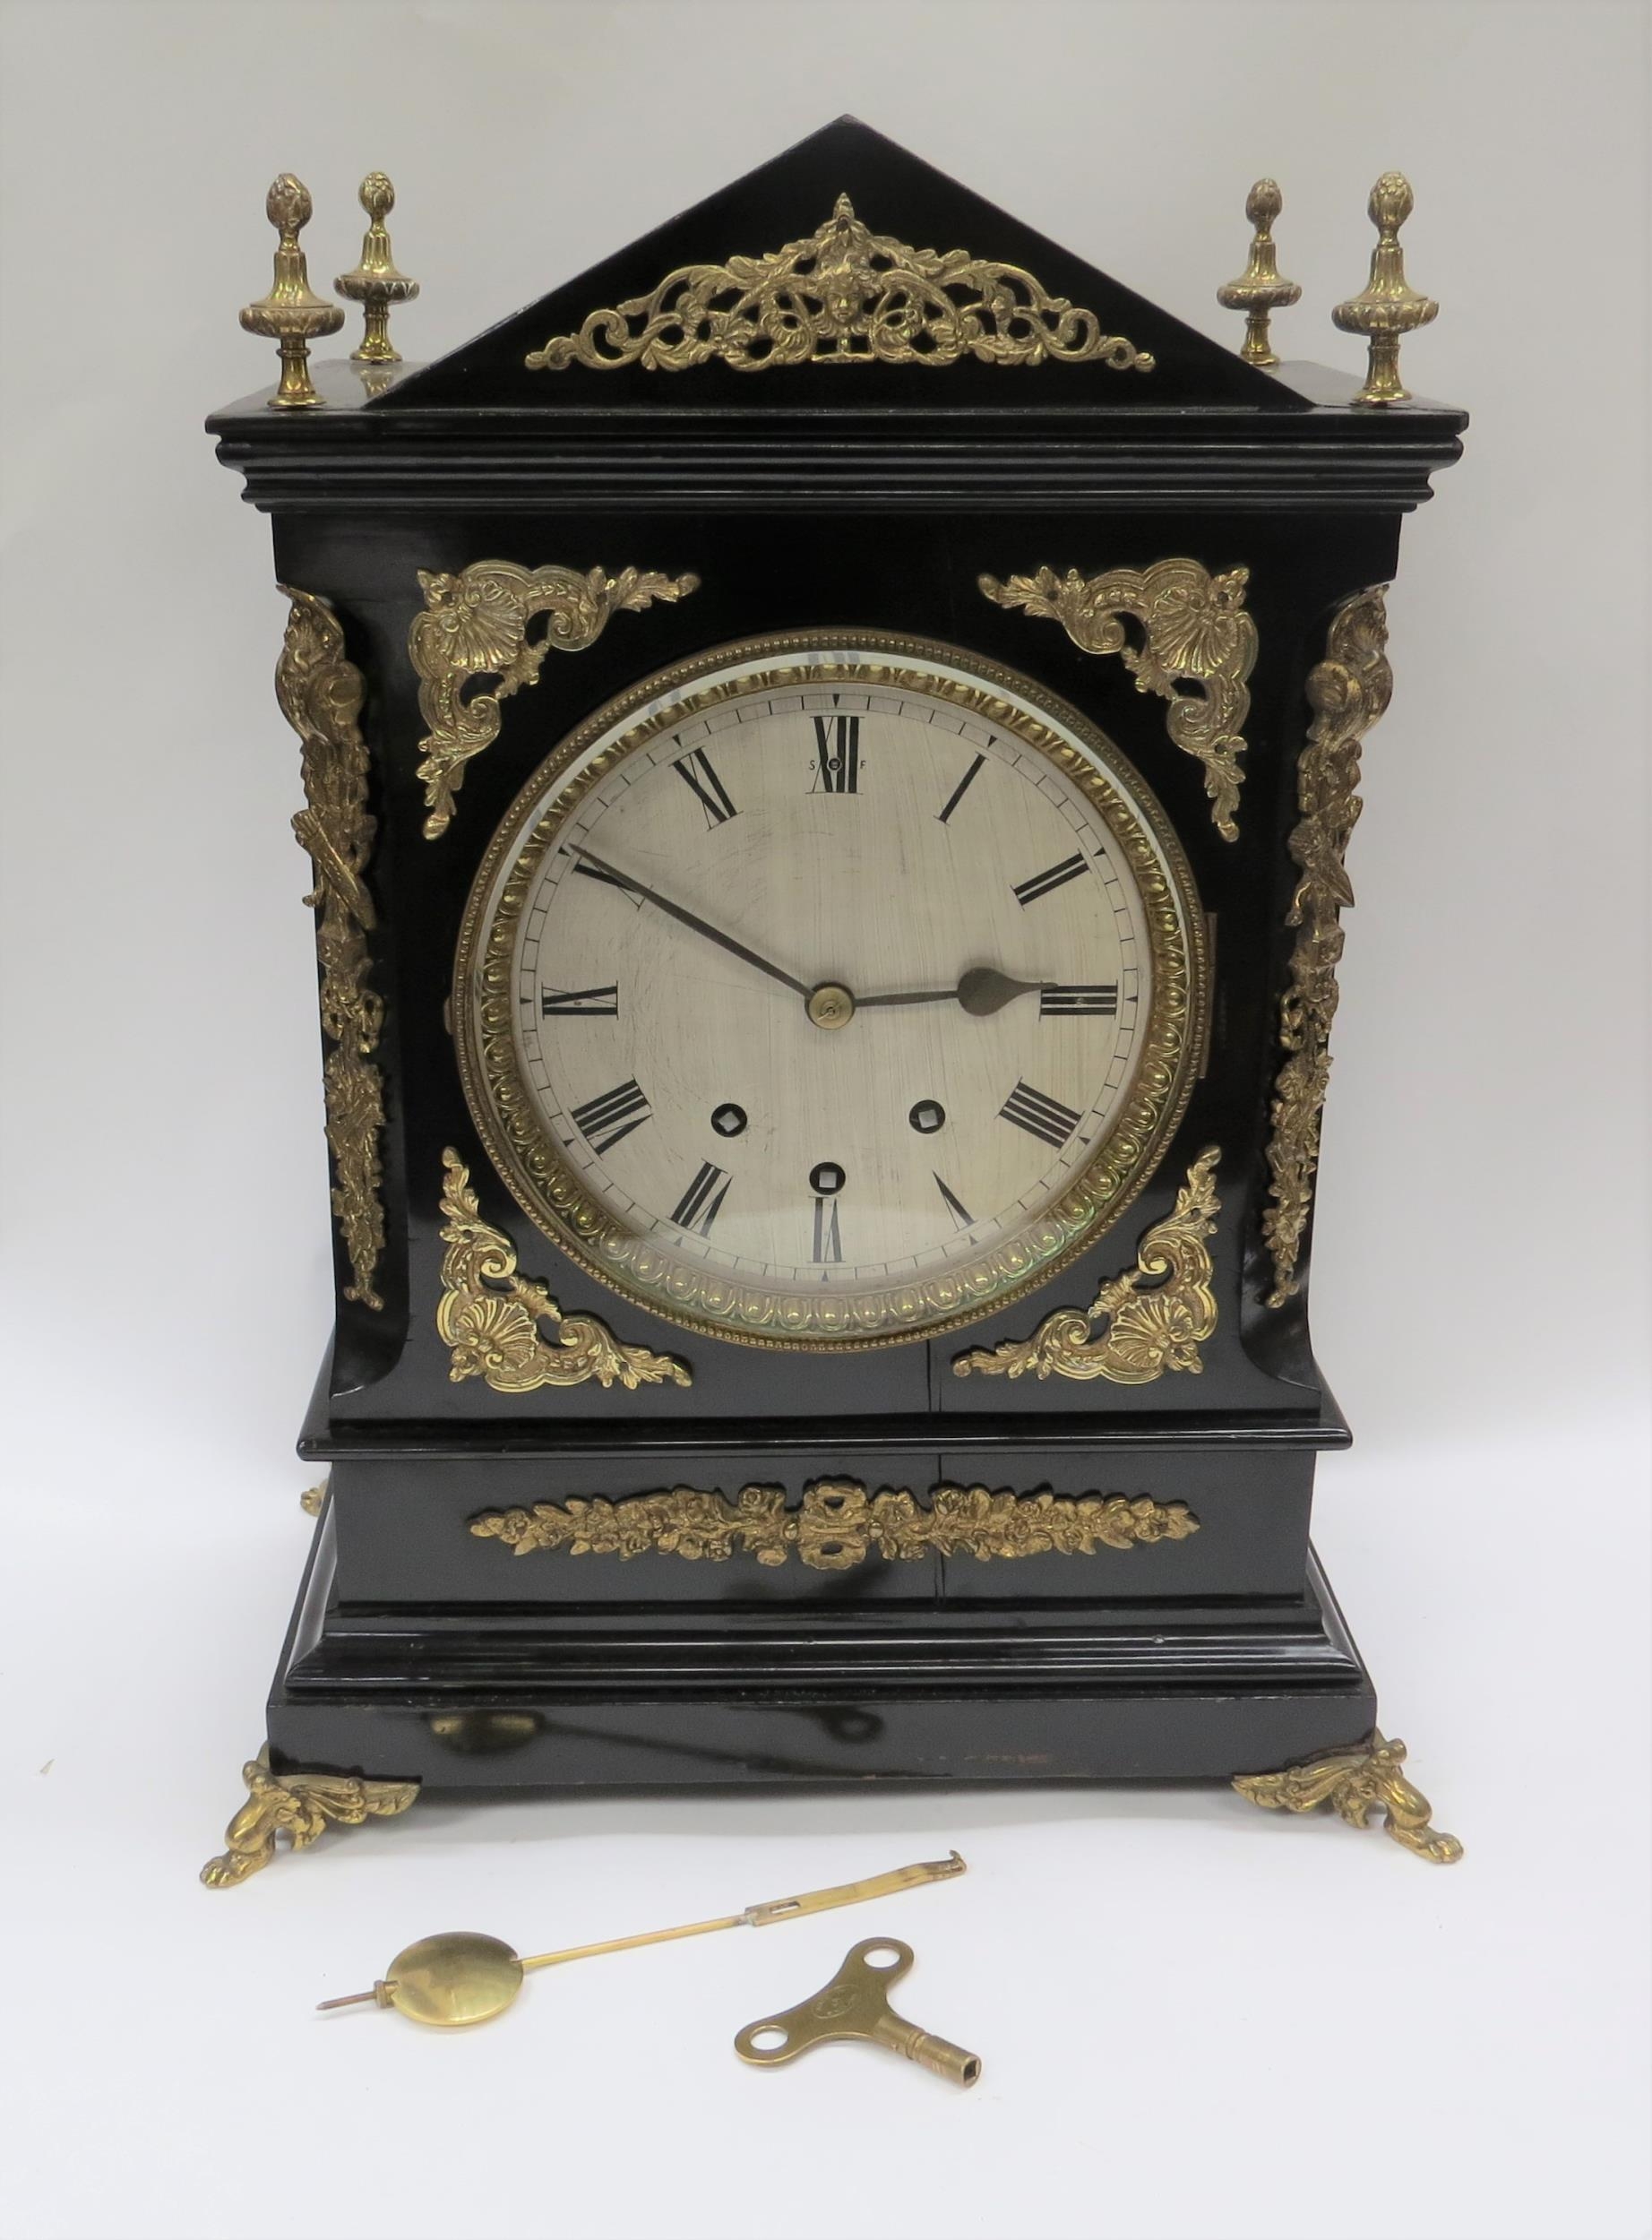 A large late 19th / early 20th Century French bracket clock, 21" x 15" x 7.5" (53cm x 38cm x